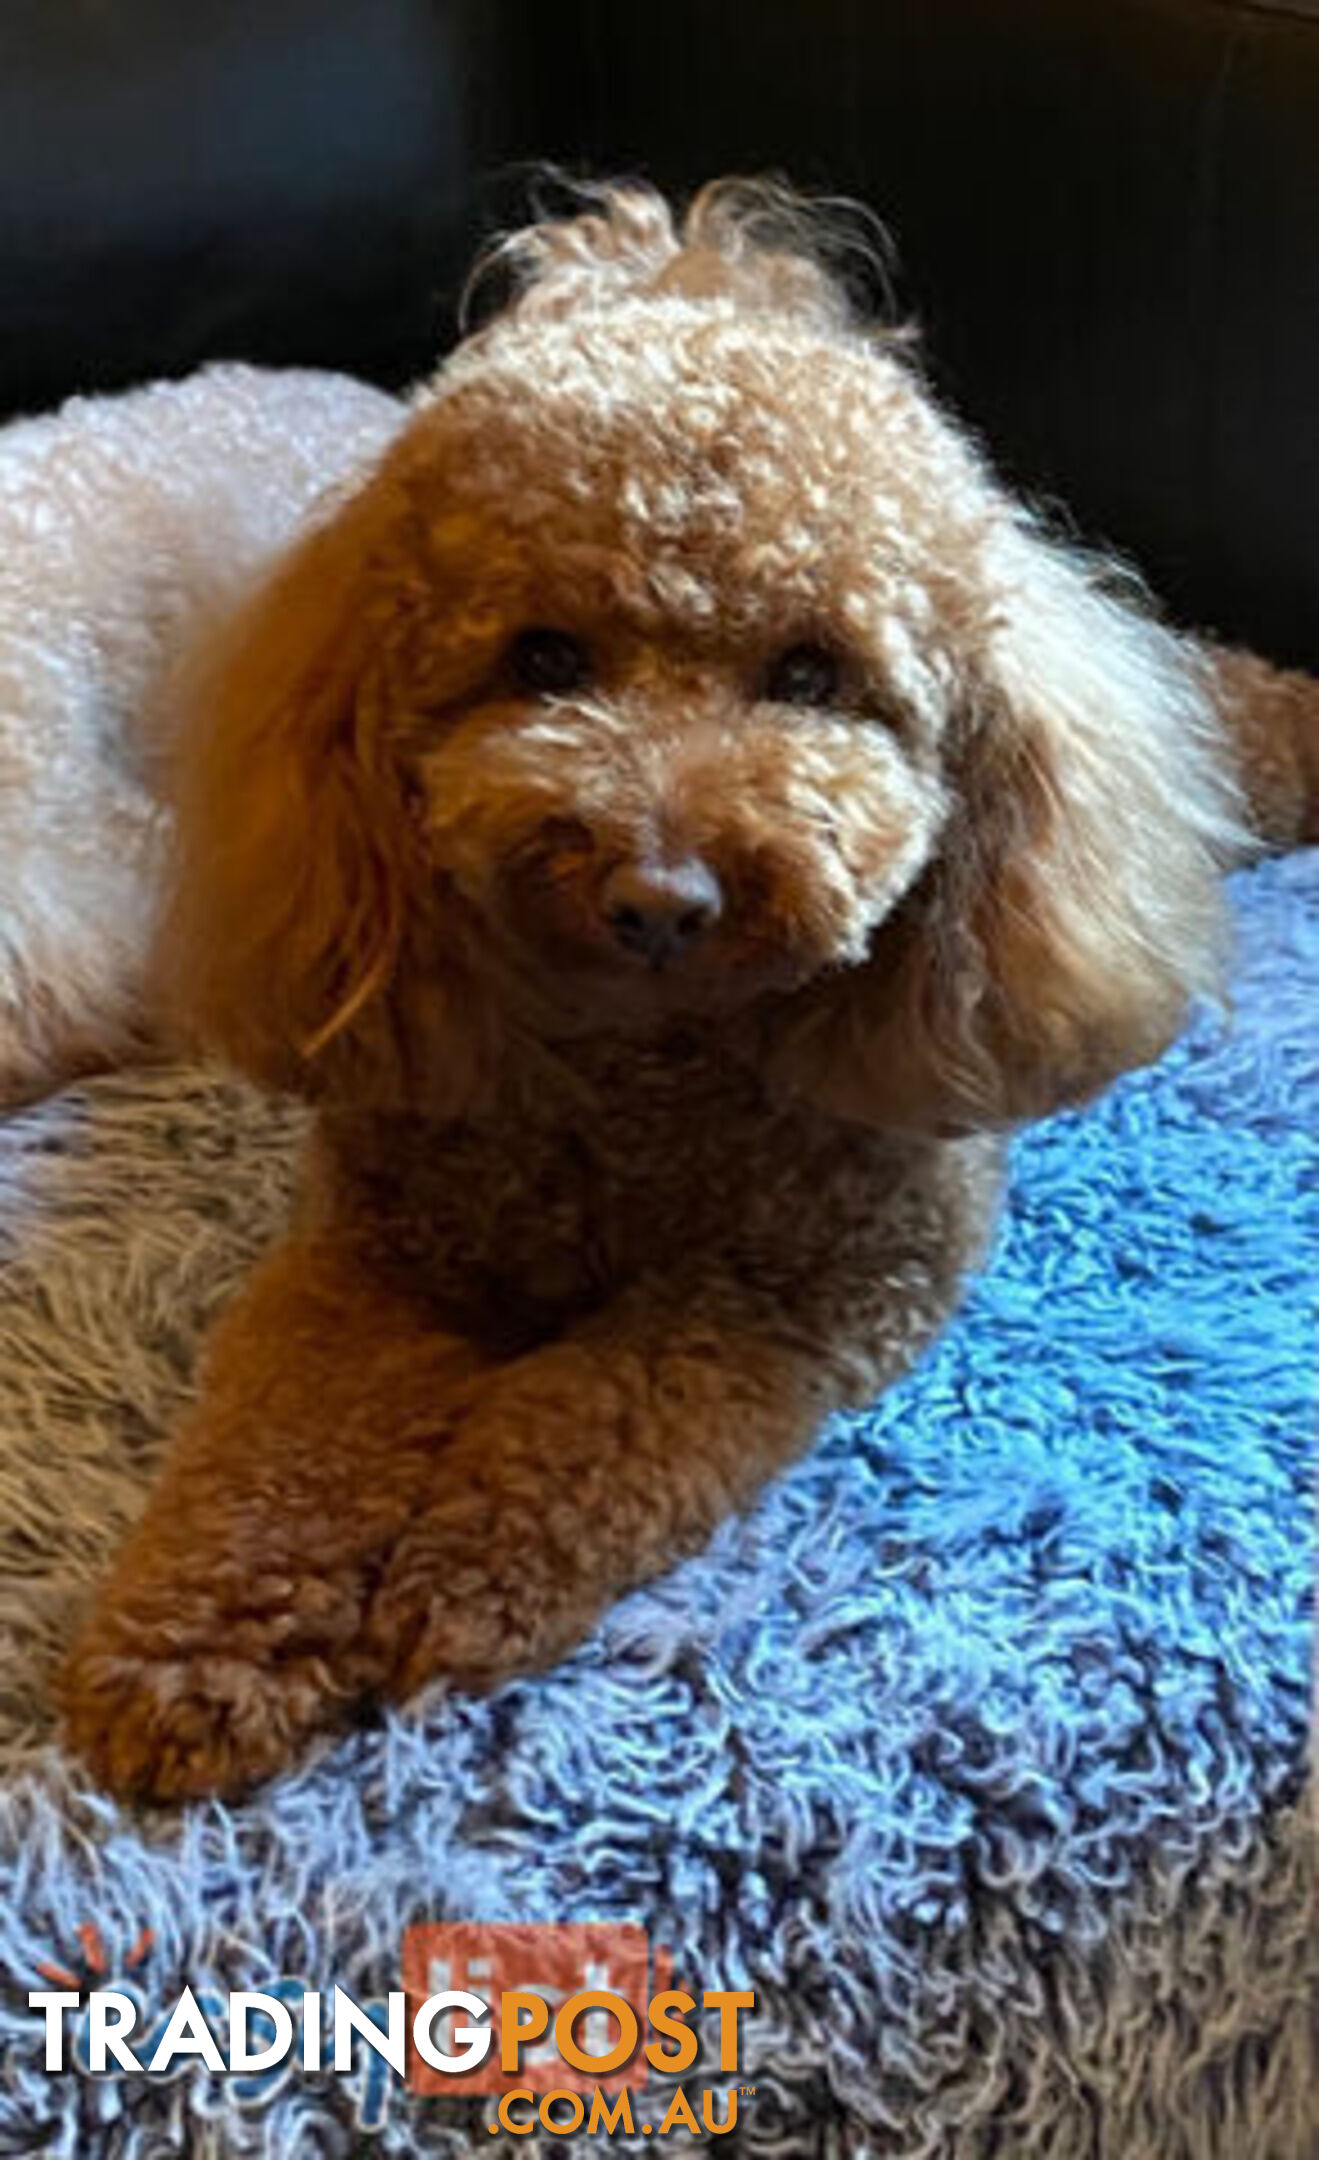 Purebred Dark Red Toy Poodle (for stud services only - not for sale)